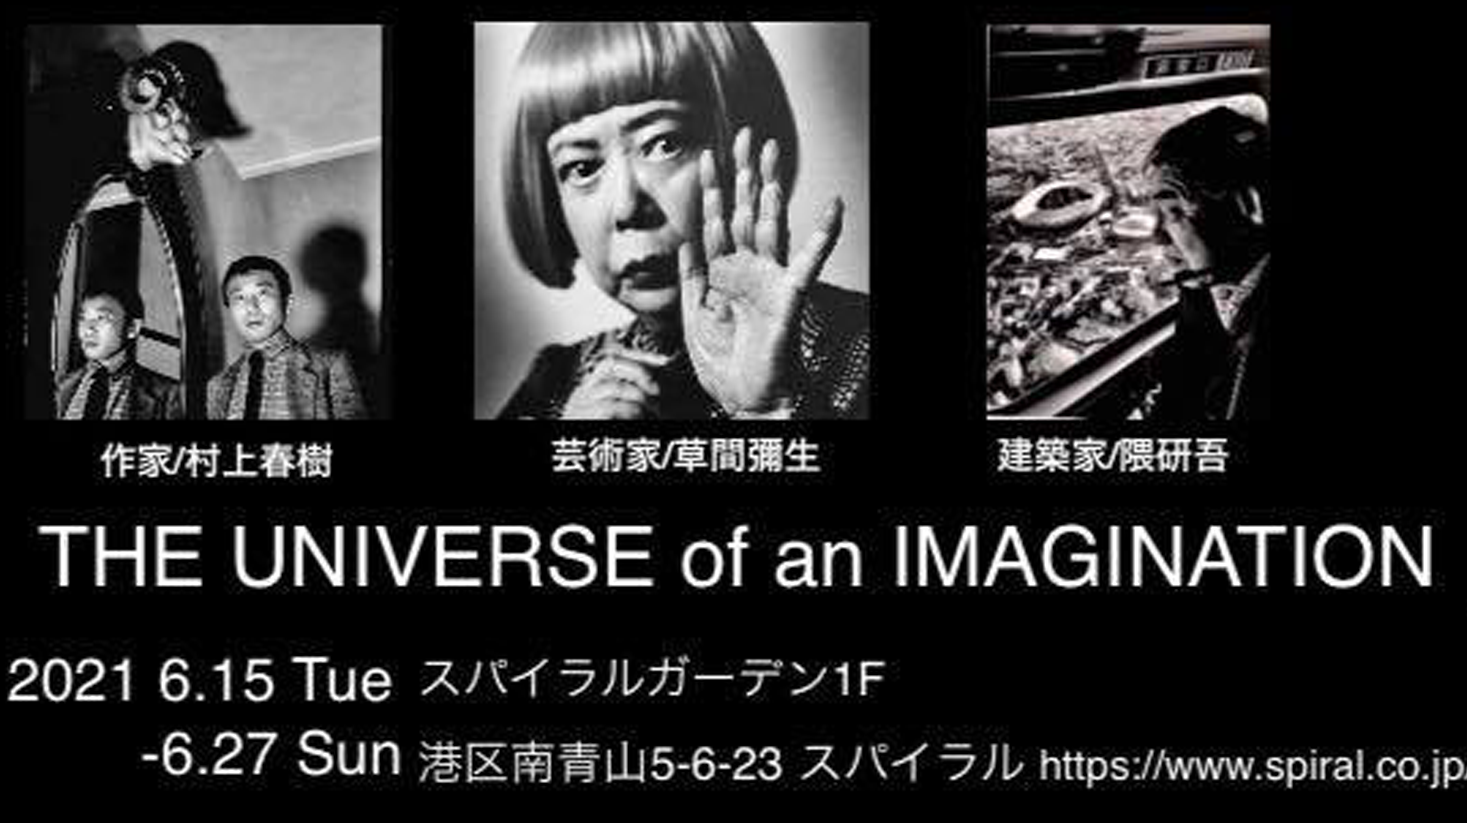 The UNIVERSE of an IMAGINATION 2021年　6月15日(火)-27日(日)　スパイラルガーデン